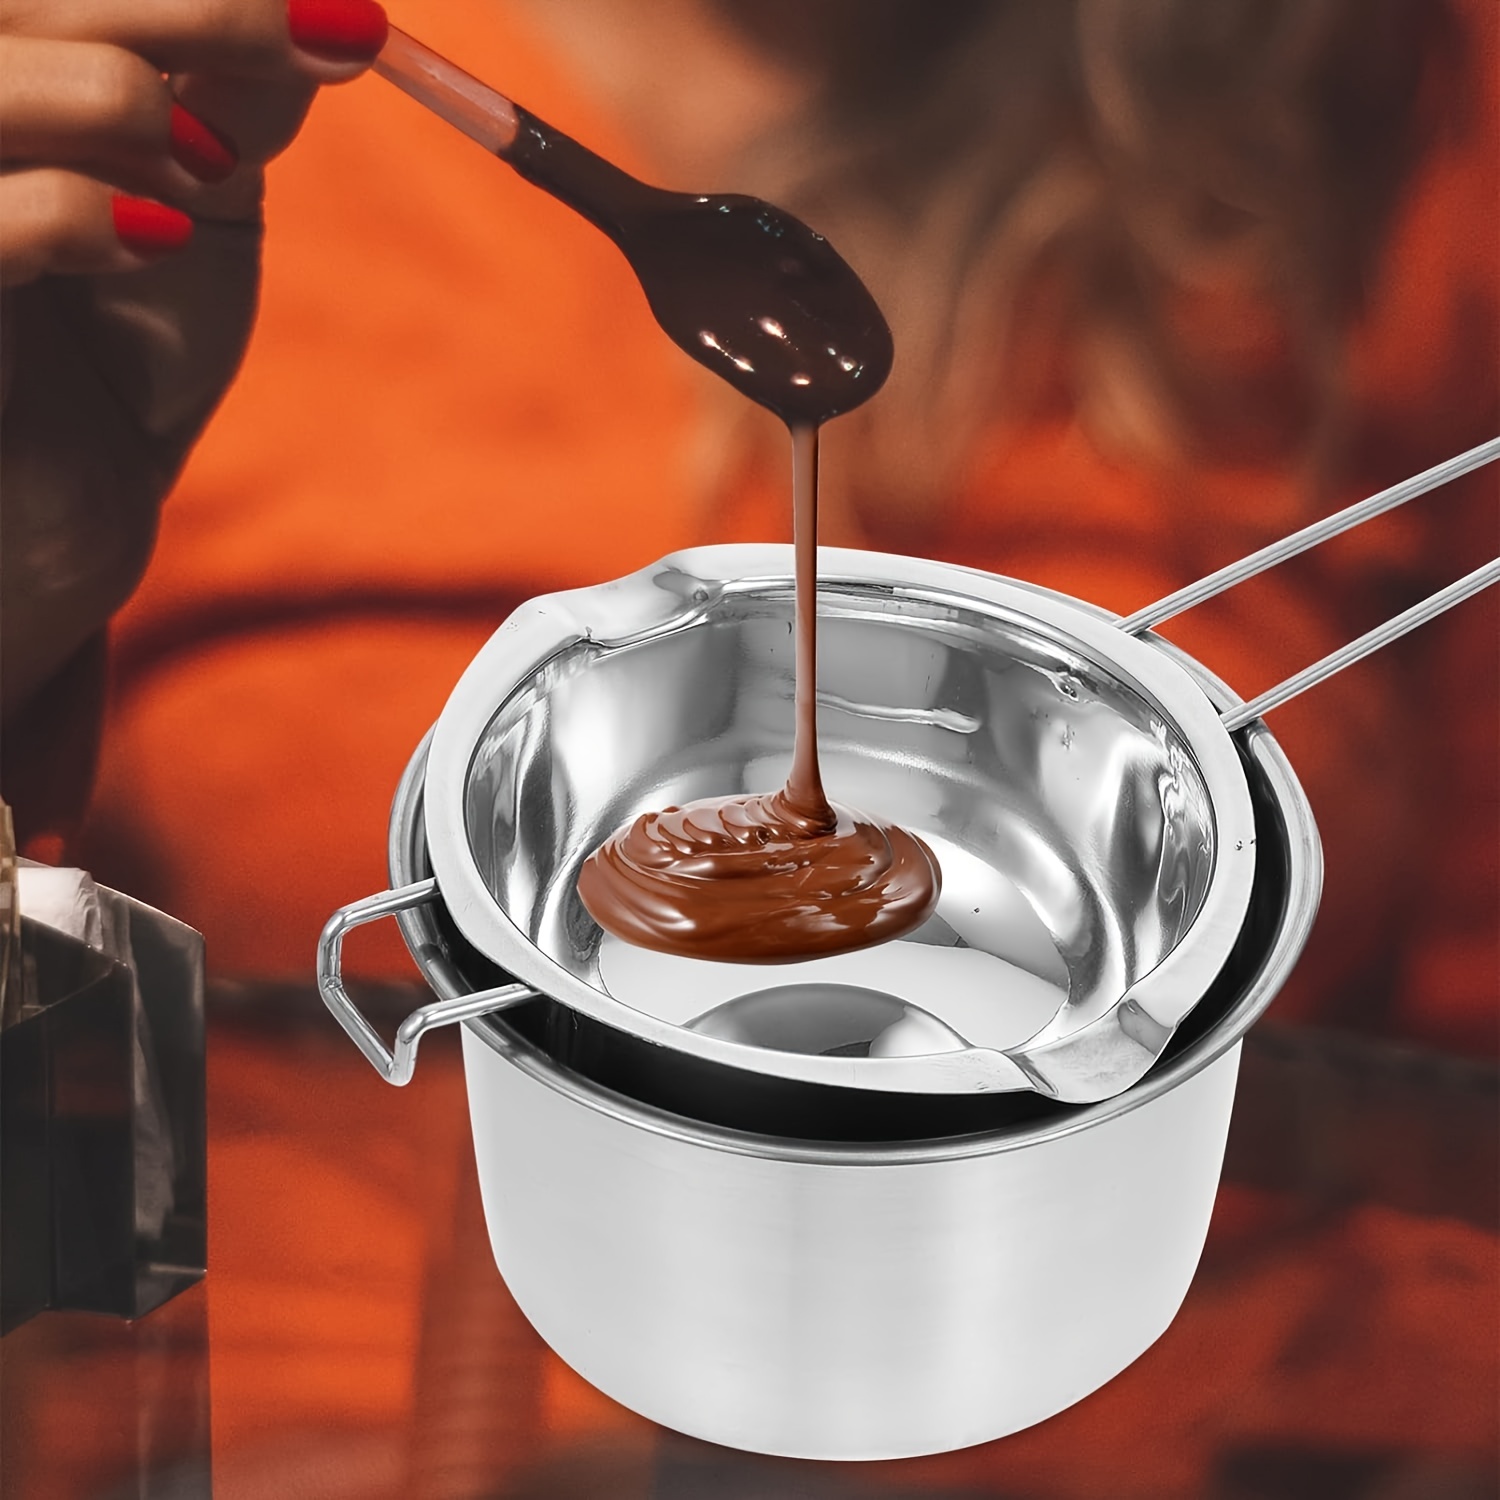 EXCEART Chocolate Melting Bowl 1 Set Stainless Steel Double Boiler Pot  Cheese Melting Pot Chocolate Melting Pot Wax Melting Pot for Home Use  Candle